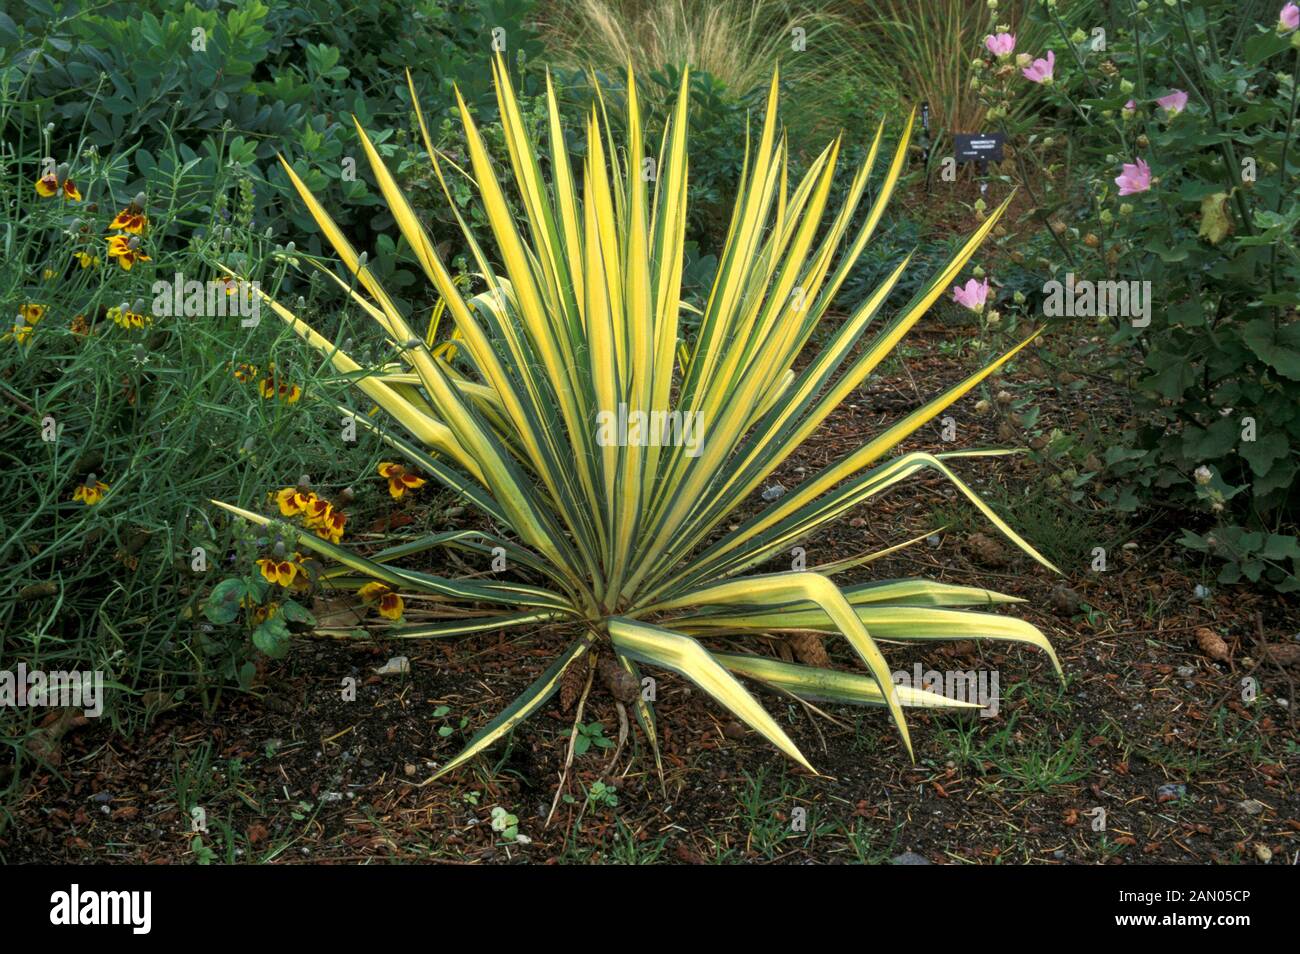 YUCCA FLACCIDA  GOLDEN SWORD   WHOLE  PLANT  YELLOW   LEAVES Stock Photo